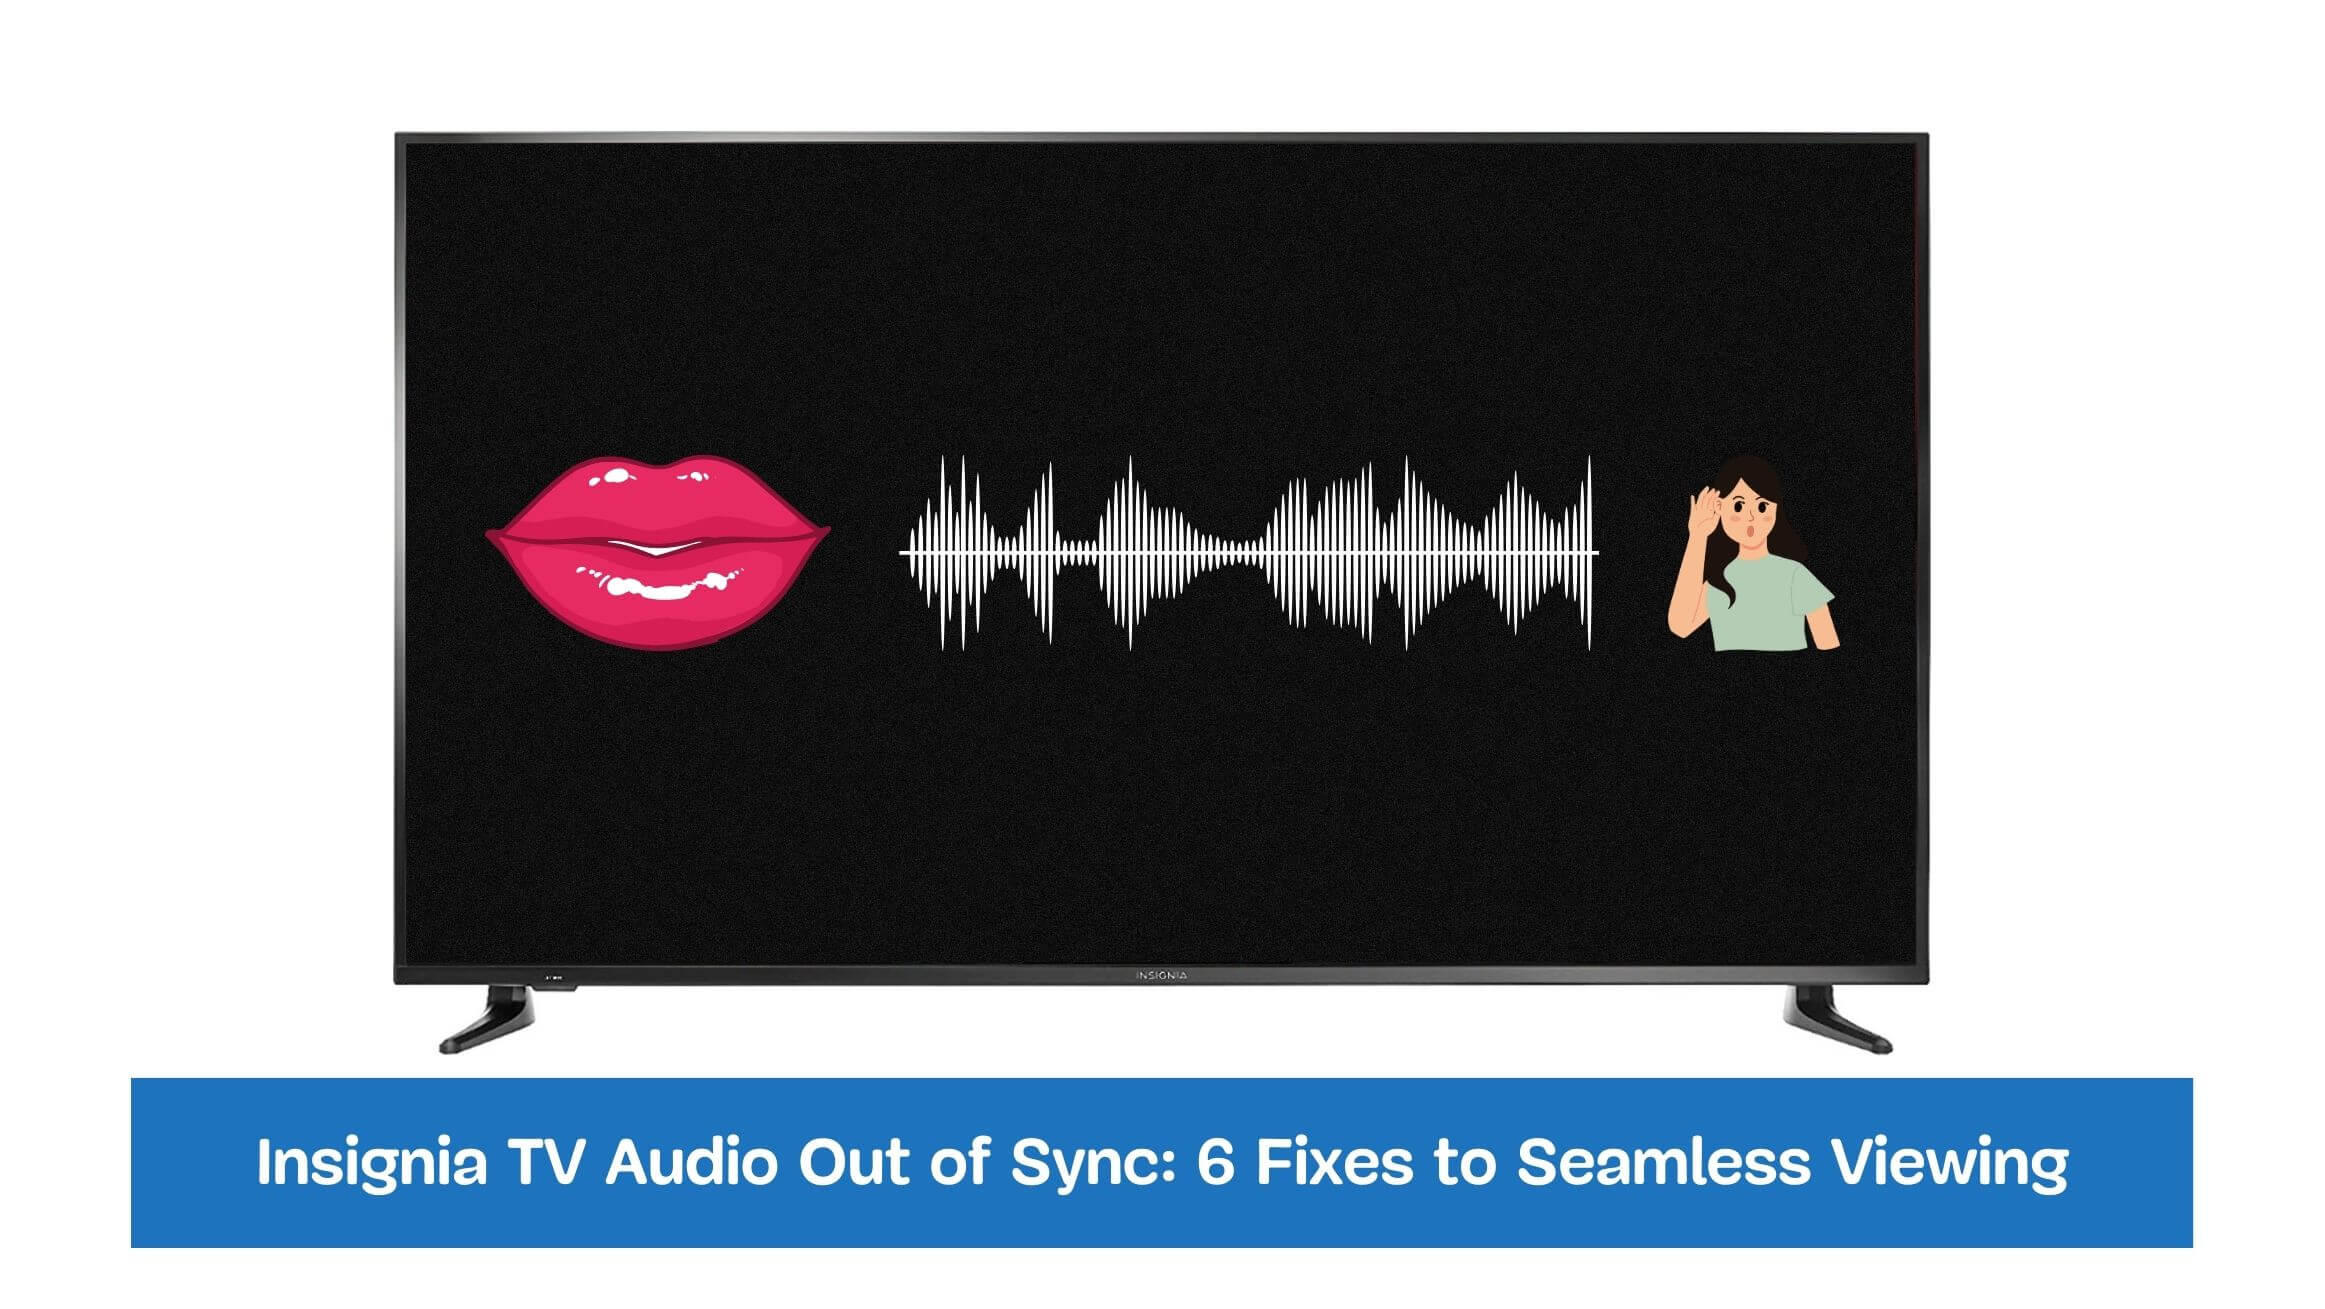 Insignia TV Audio Out of Sync: 6 Fixes to Seamless Viewing